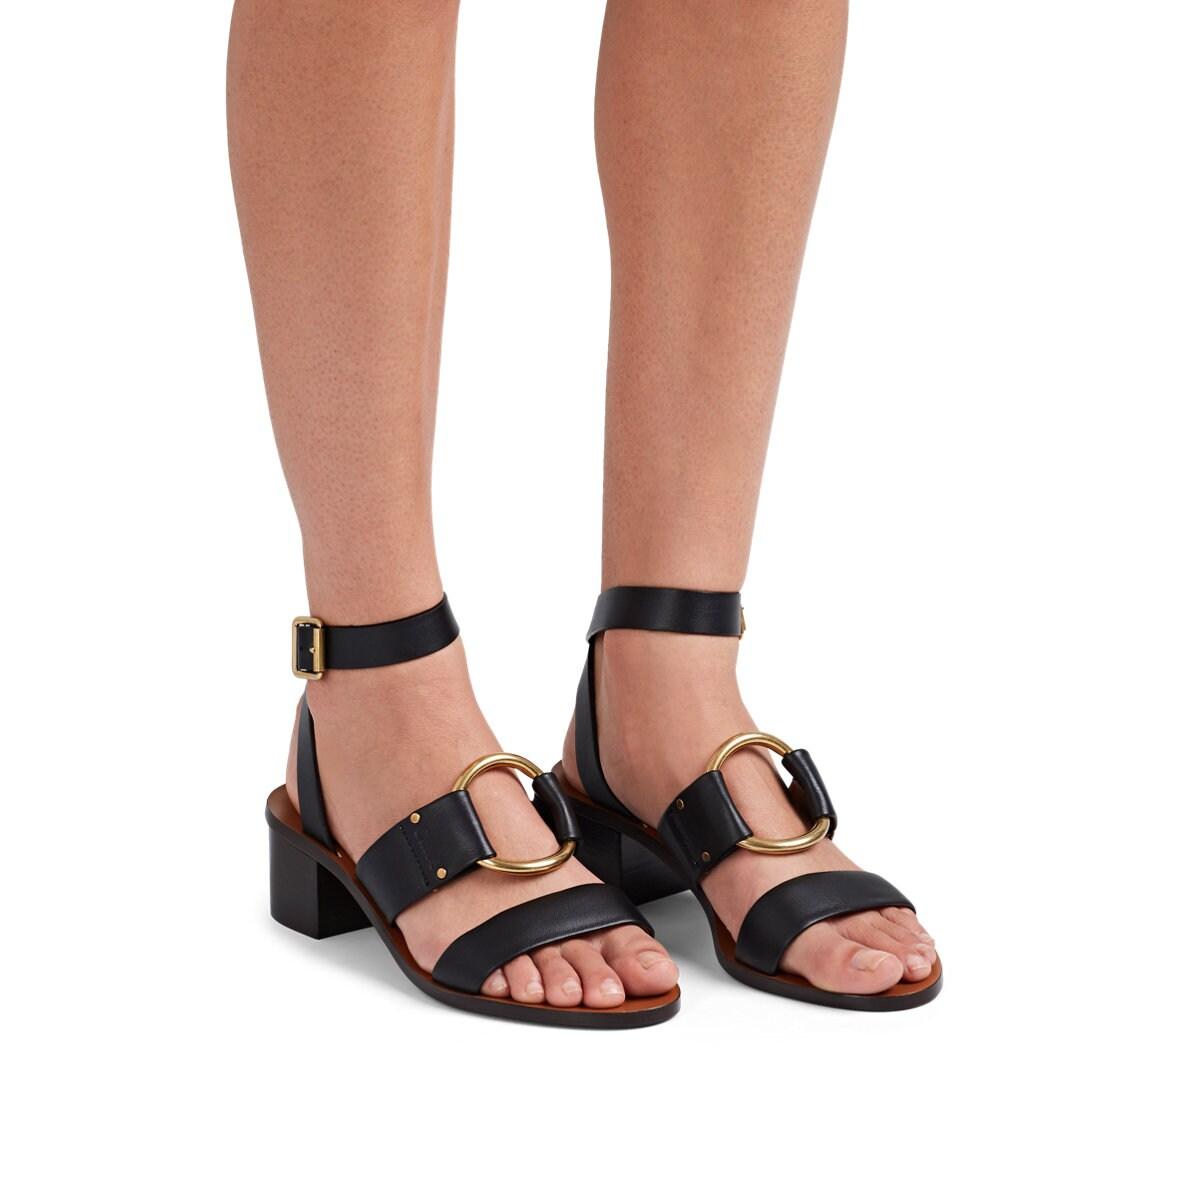 Chloé Rony Leather Ankle-strap Sandals in Black - Lyst